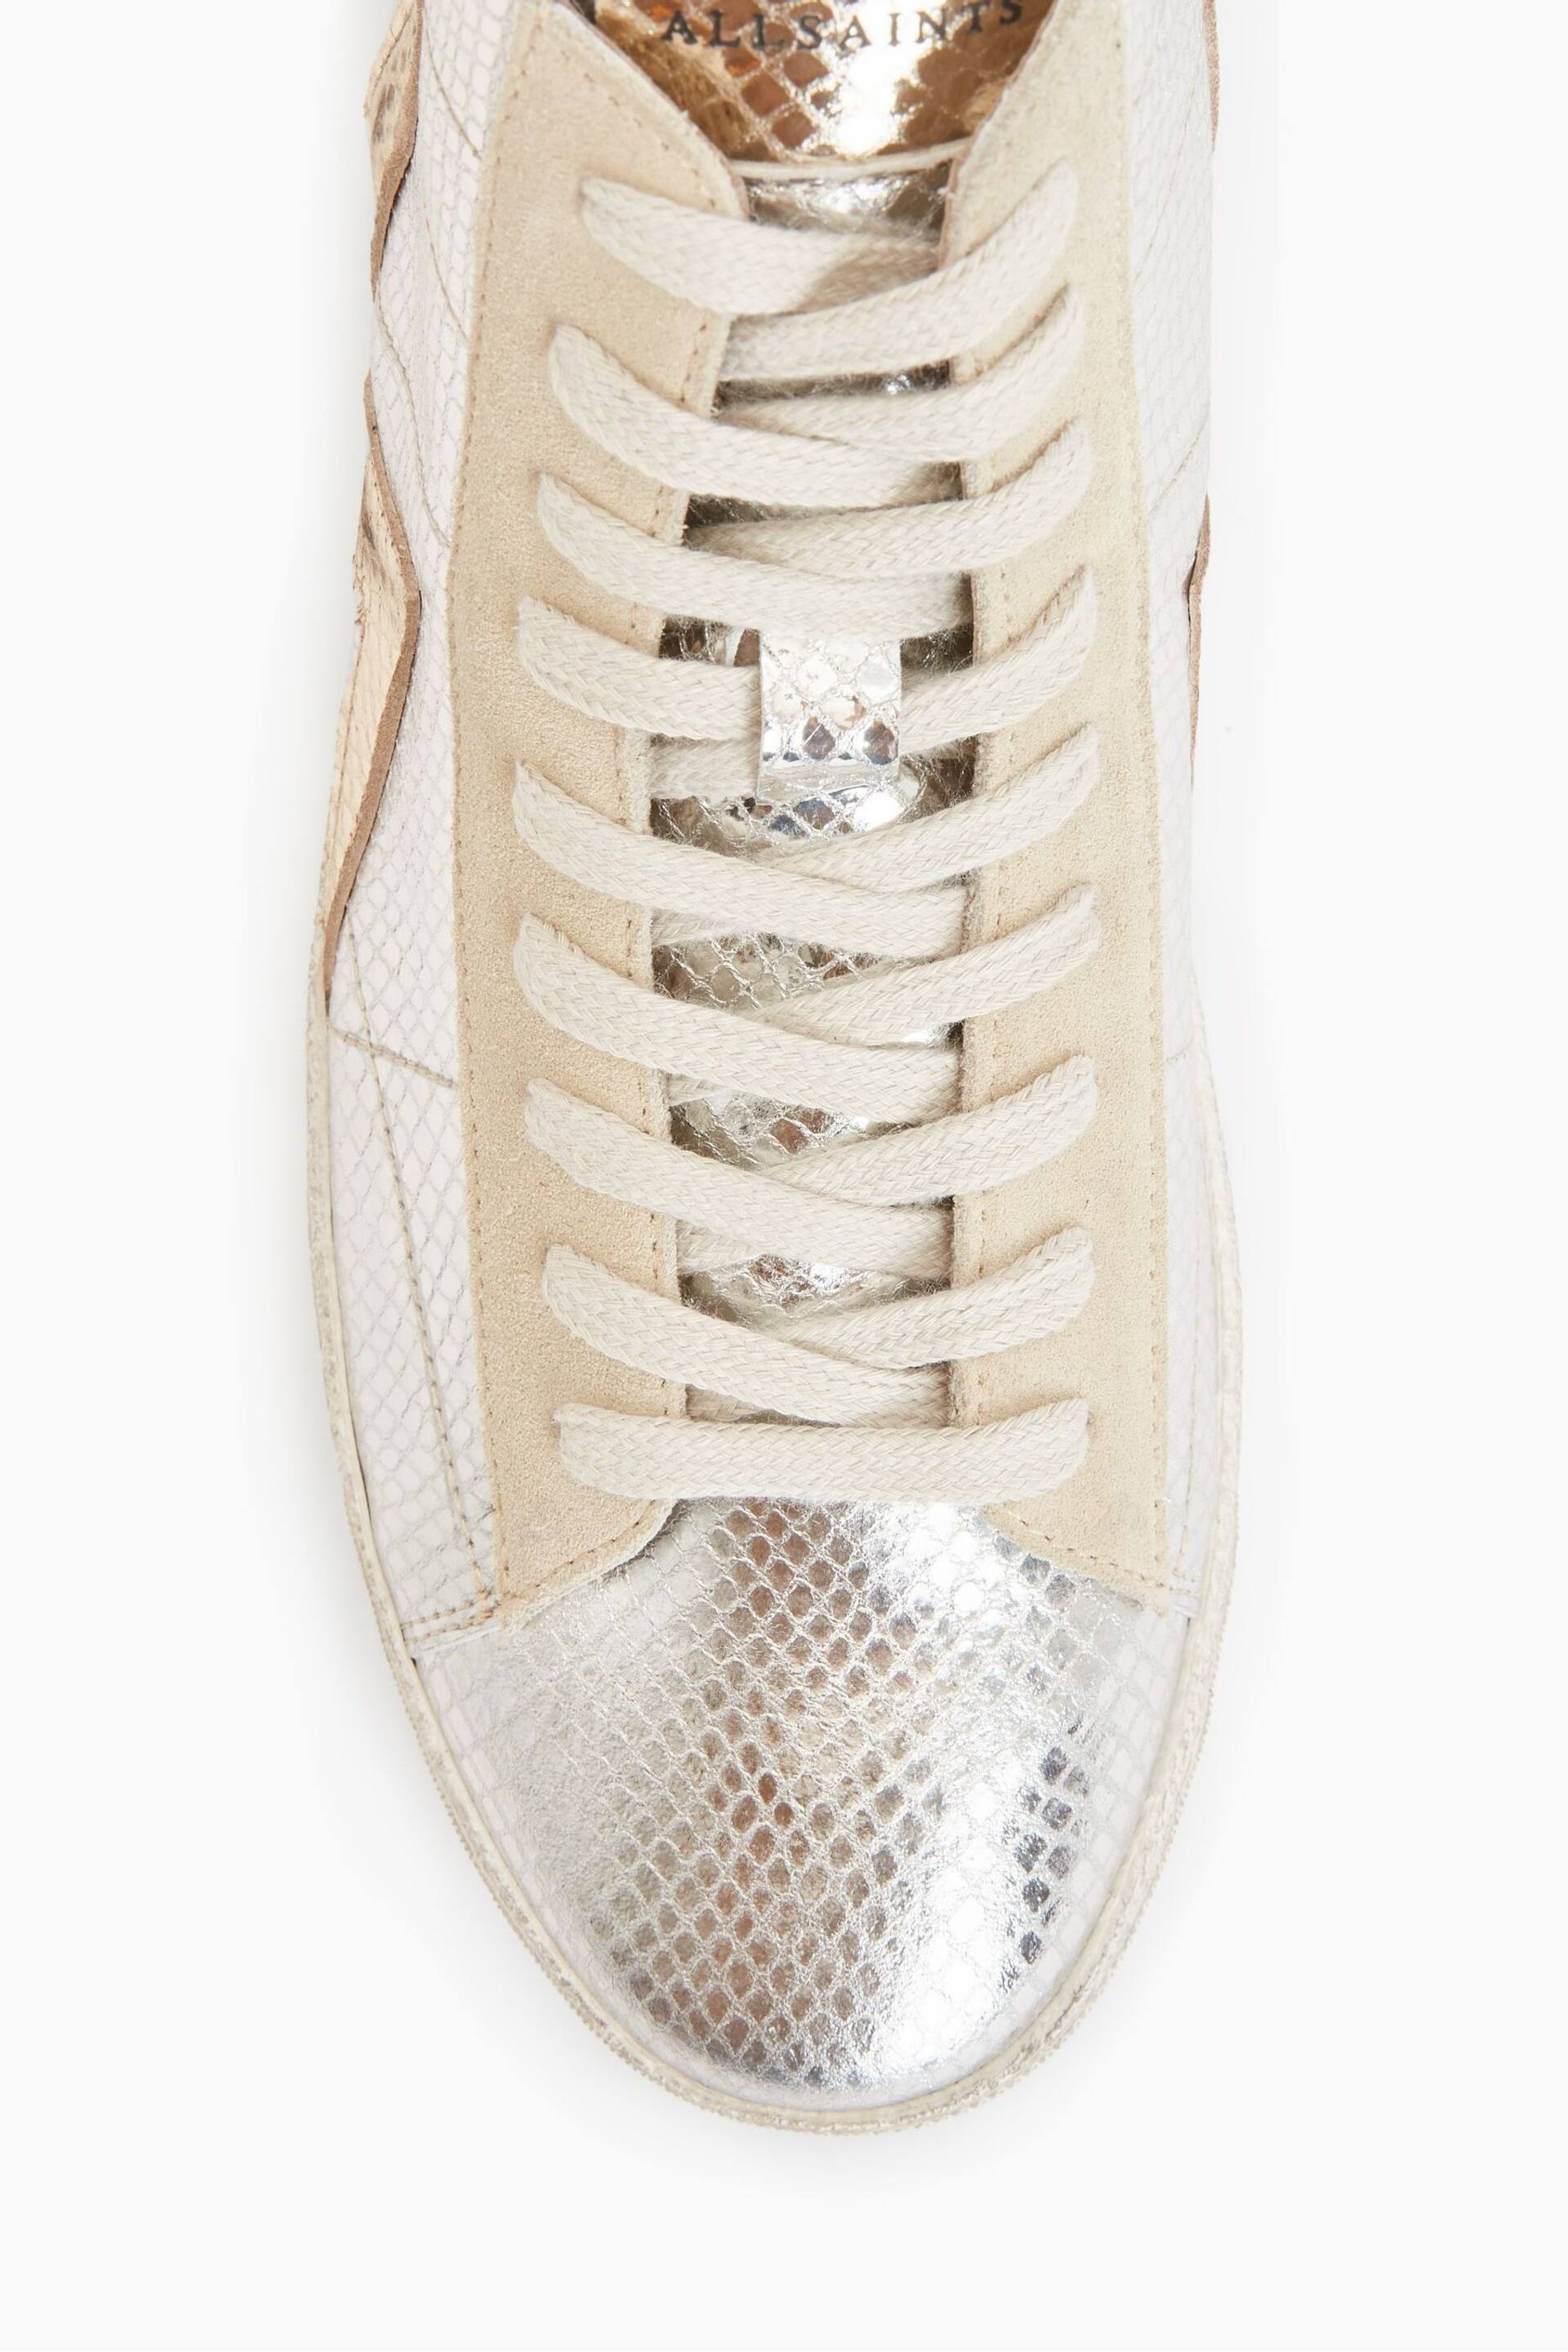 AllSaints Gold Tundy Bolt Met High Trainers - Image 4 of 6